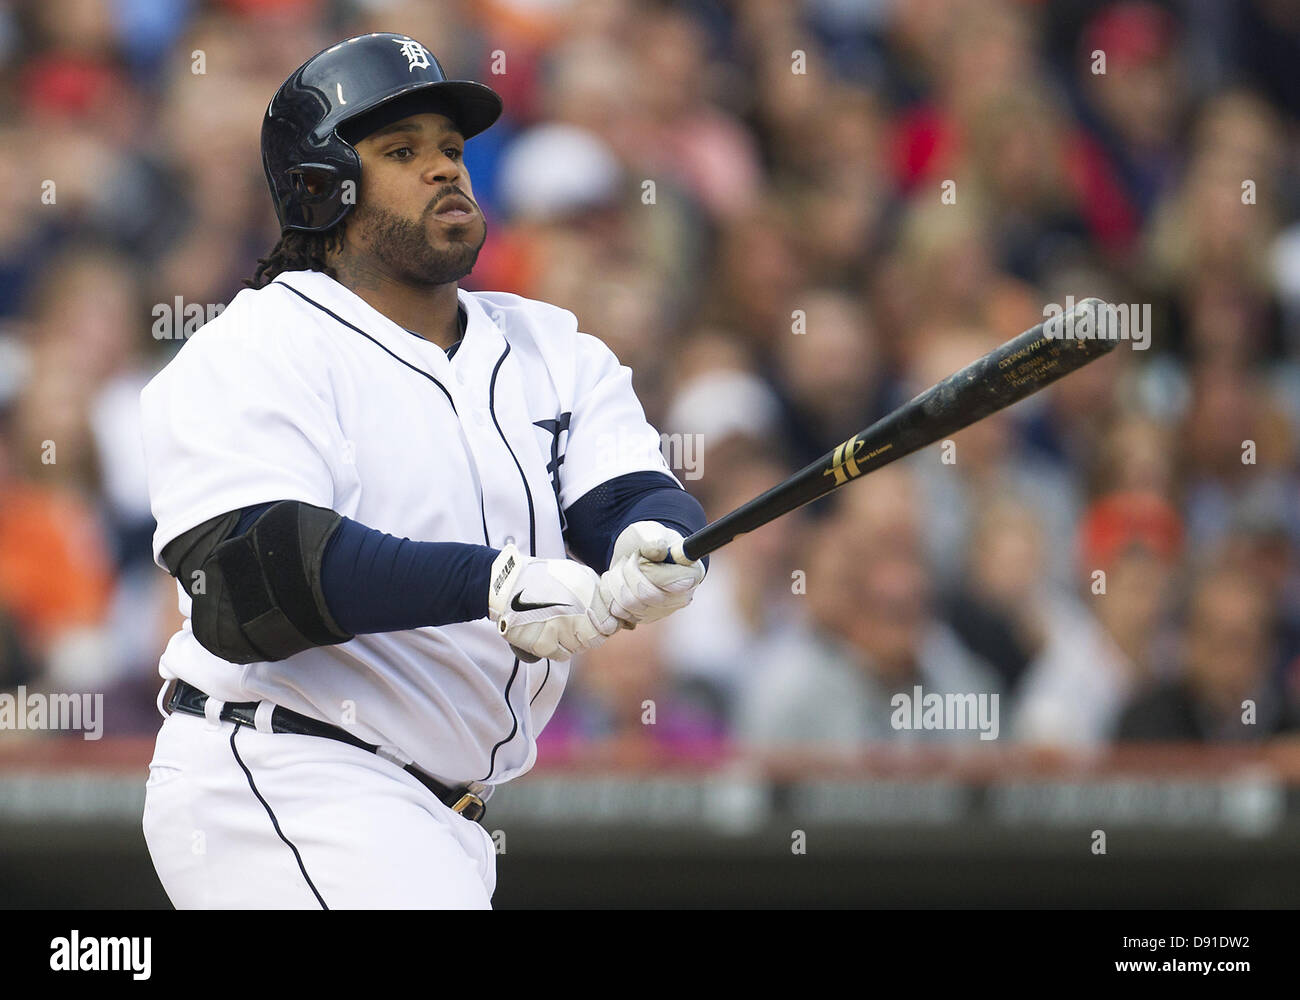 June 5, 2013 - Detroit, Michigan, United States of America - June 05, 2013: Detroit Tigers first baseman Prince Fielder (28) at bat during MLB game action between the Tampa Bay Rays and the Detroit Tigers at Comerica Park in Detroit, Michigan. The Rays defeated the Tigers 3-0. Stock Photo